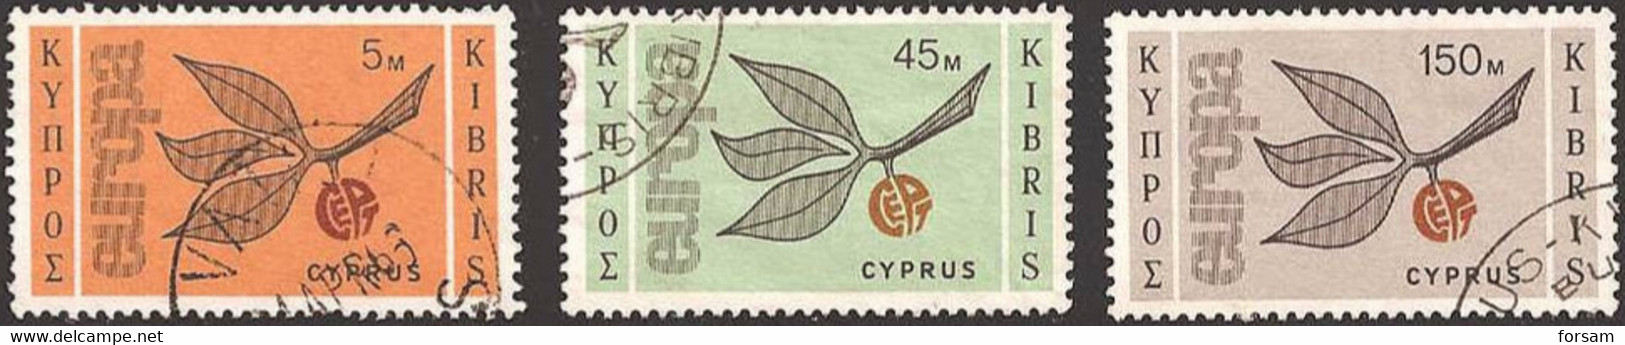 CYPRUS..1965..Michel # 258-260...used. - Used Stamps